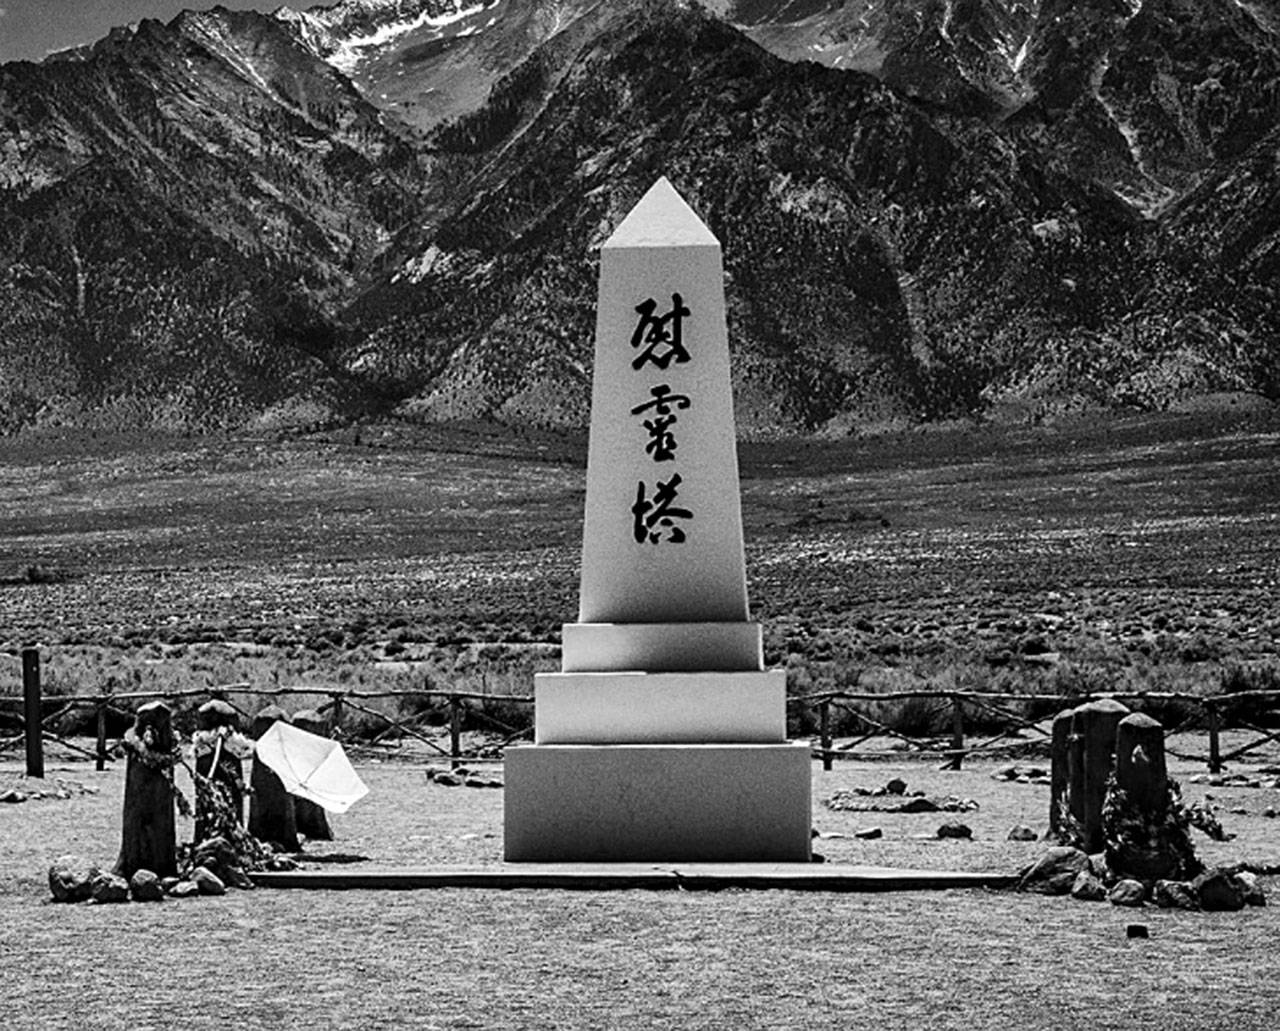 Brian Goodman’s photo ”Soul Consoling Tower, Cemetery, and the Sierra Nevada” (2015), details one of the few remaining structures left after the Manzanar internment camp was dismantled, sold off and bulldozed. The obelisk monument in the camps cemetery was designed and built by incarceree stonemason Ryozo Kado and is inscribed with Japanese characters which translate to “Soul Consoling Tower.” Photo by Brian Goodman